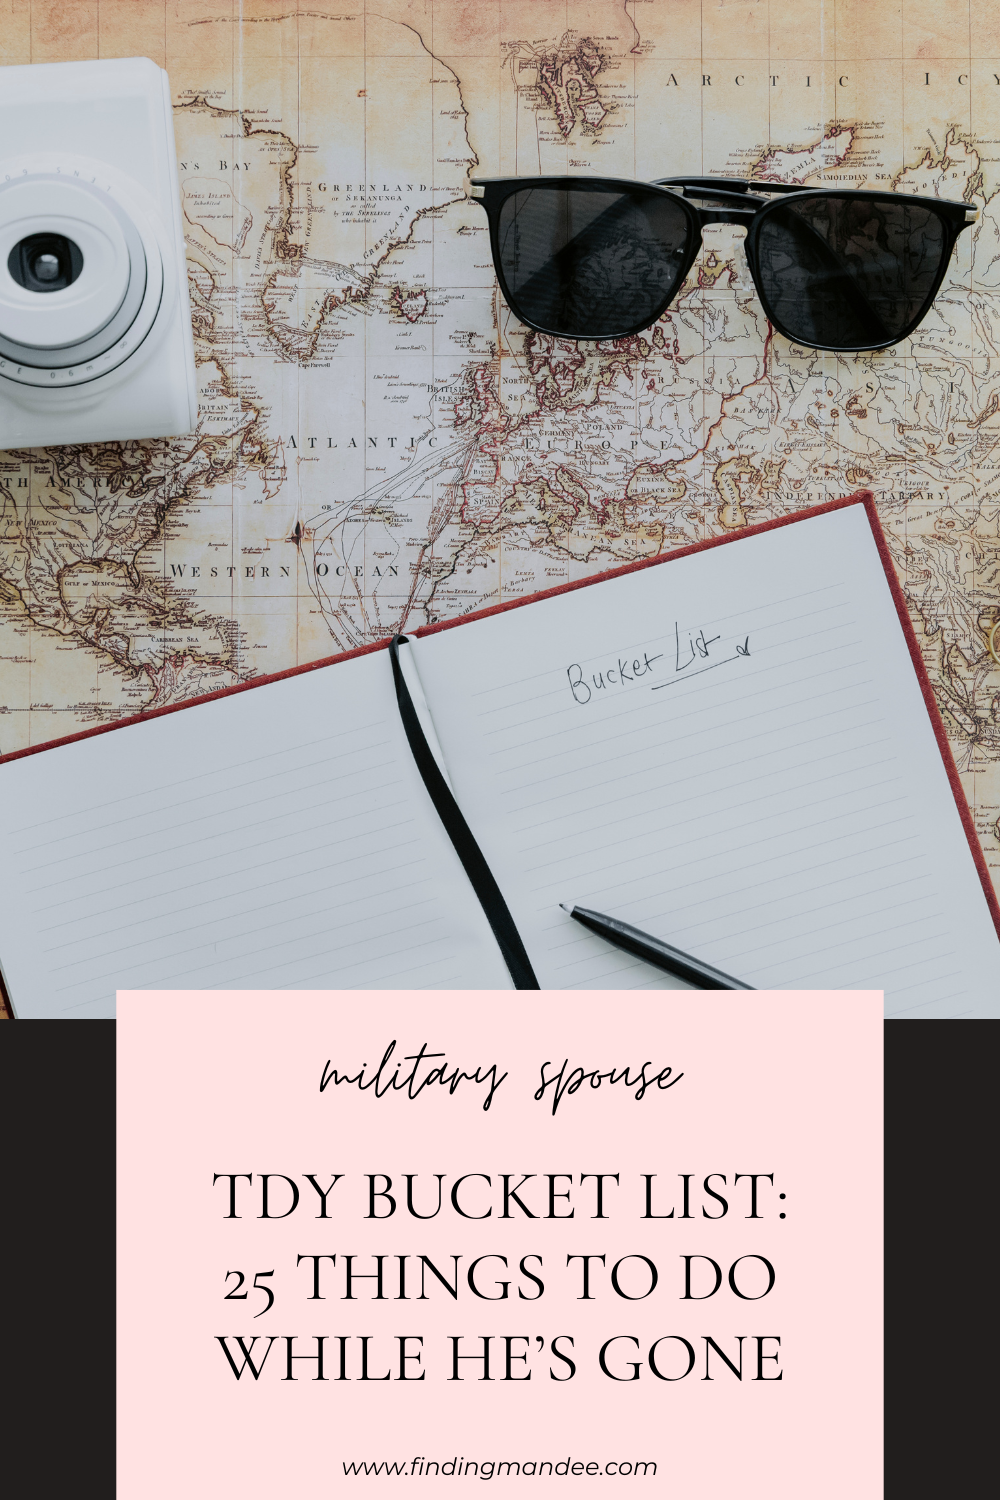 TDY Bucket List: 25 Things to do While My Husband is Gone | Finding Mandee